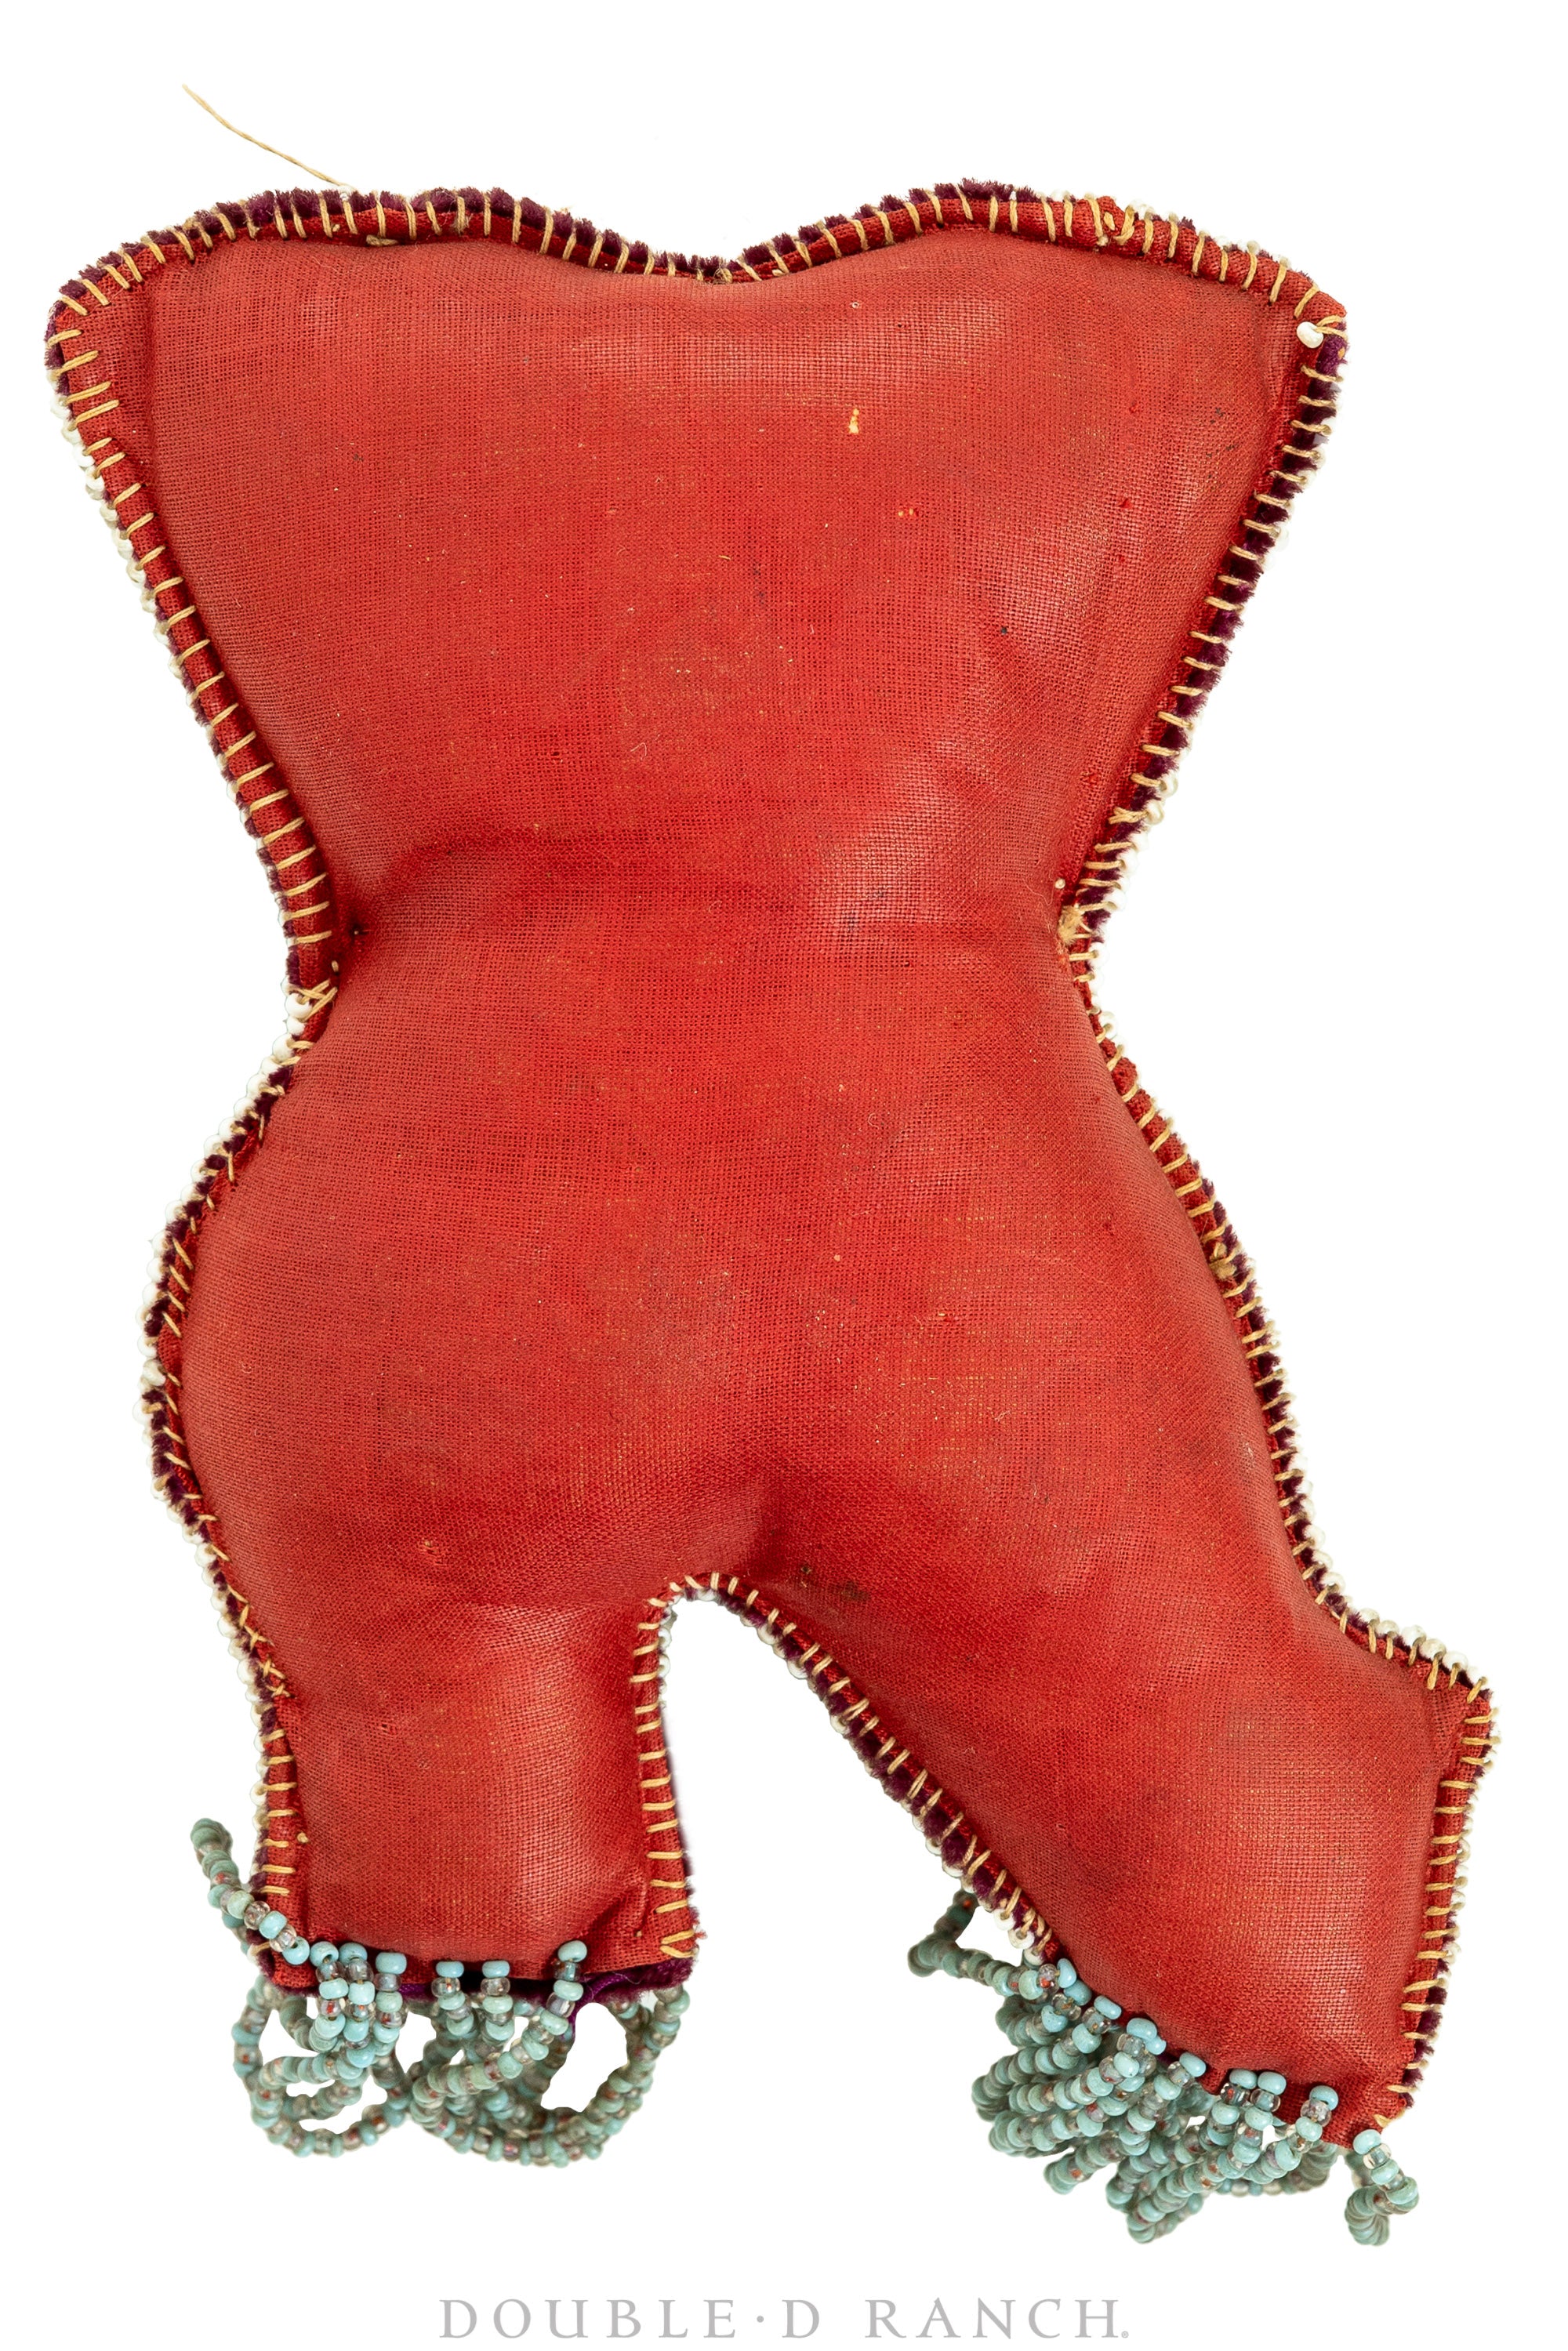 Whimsey, Boot, Heavy Beading, Vintage, Turn of the Century, 269